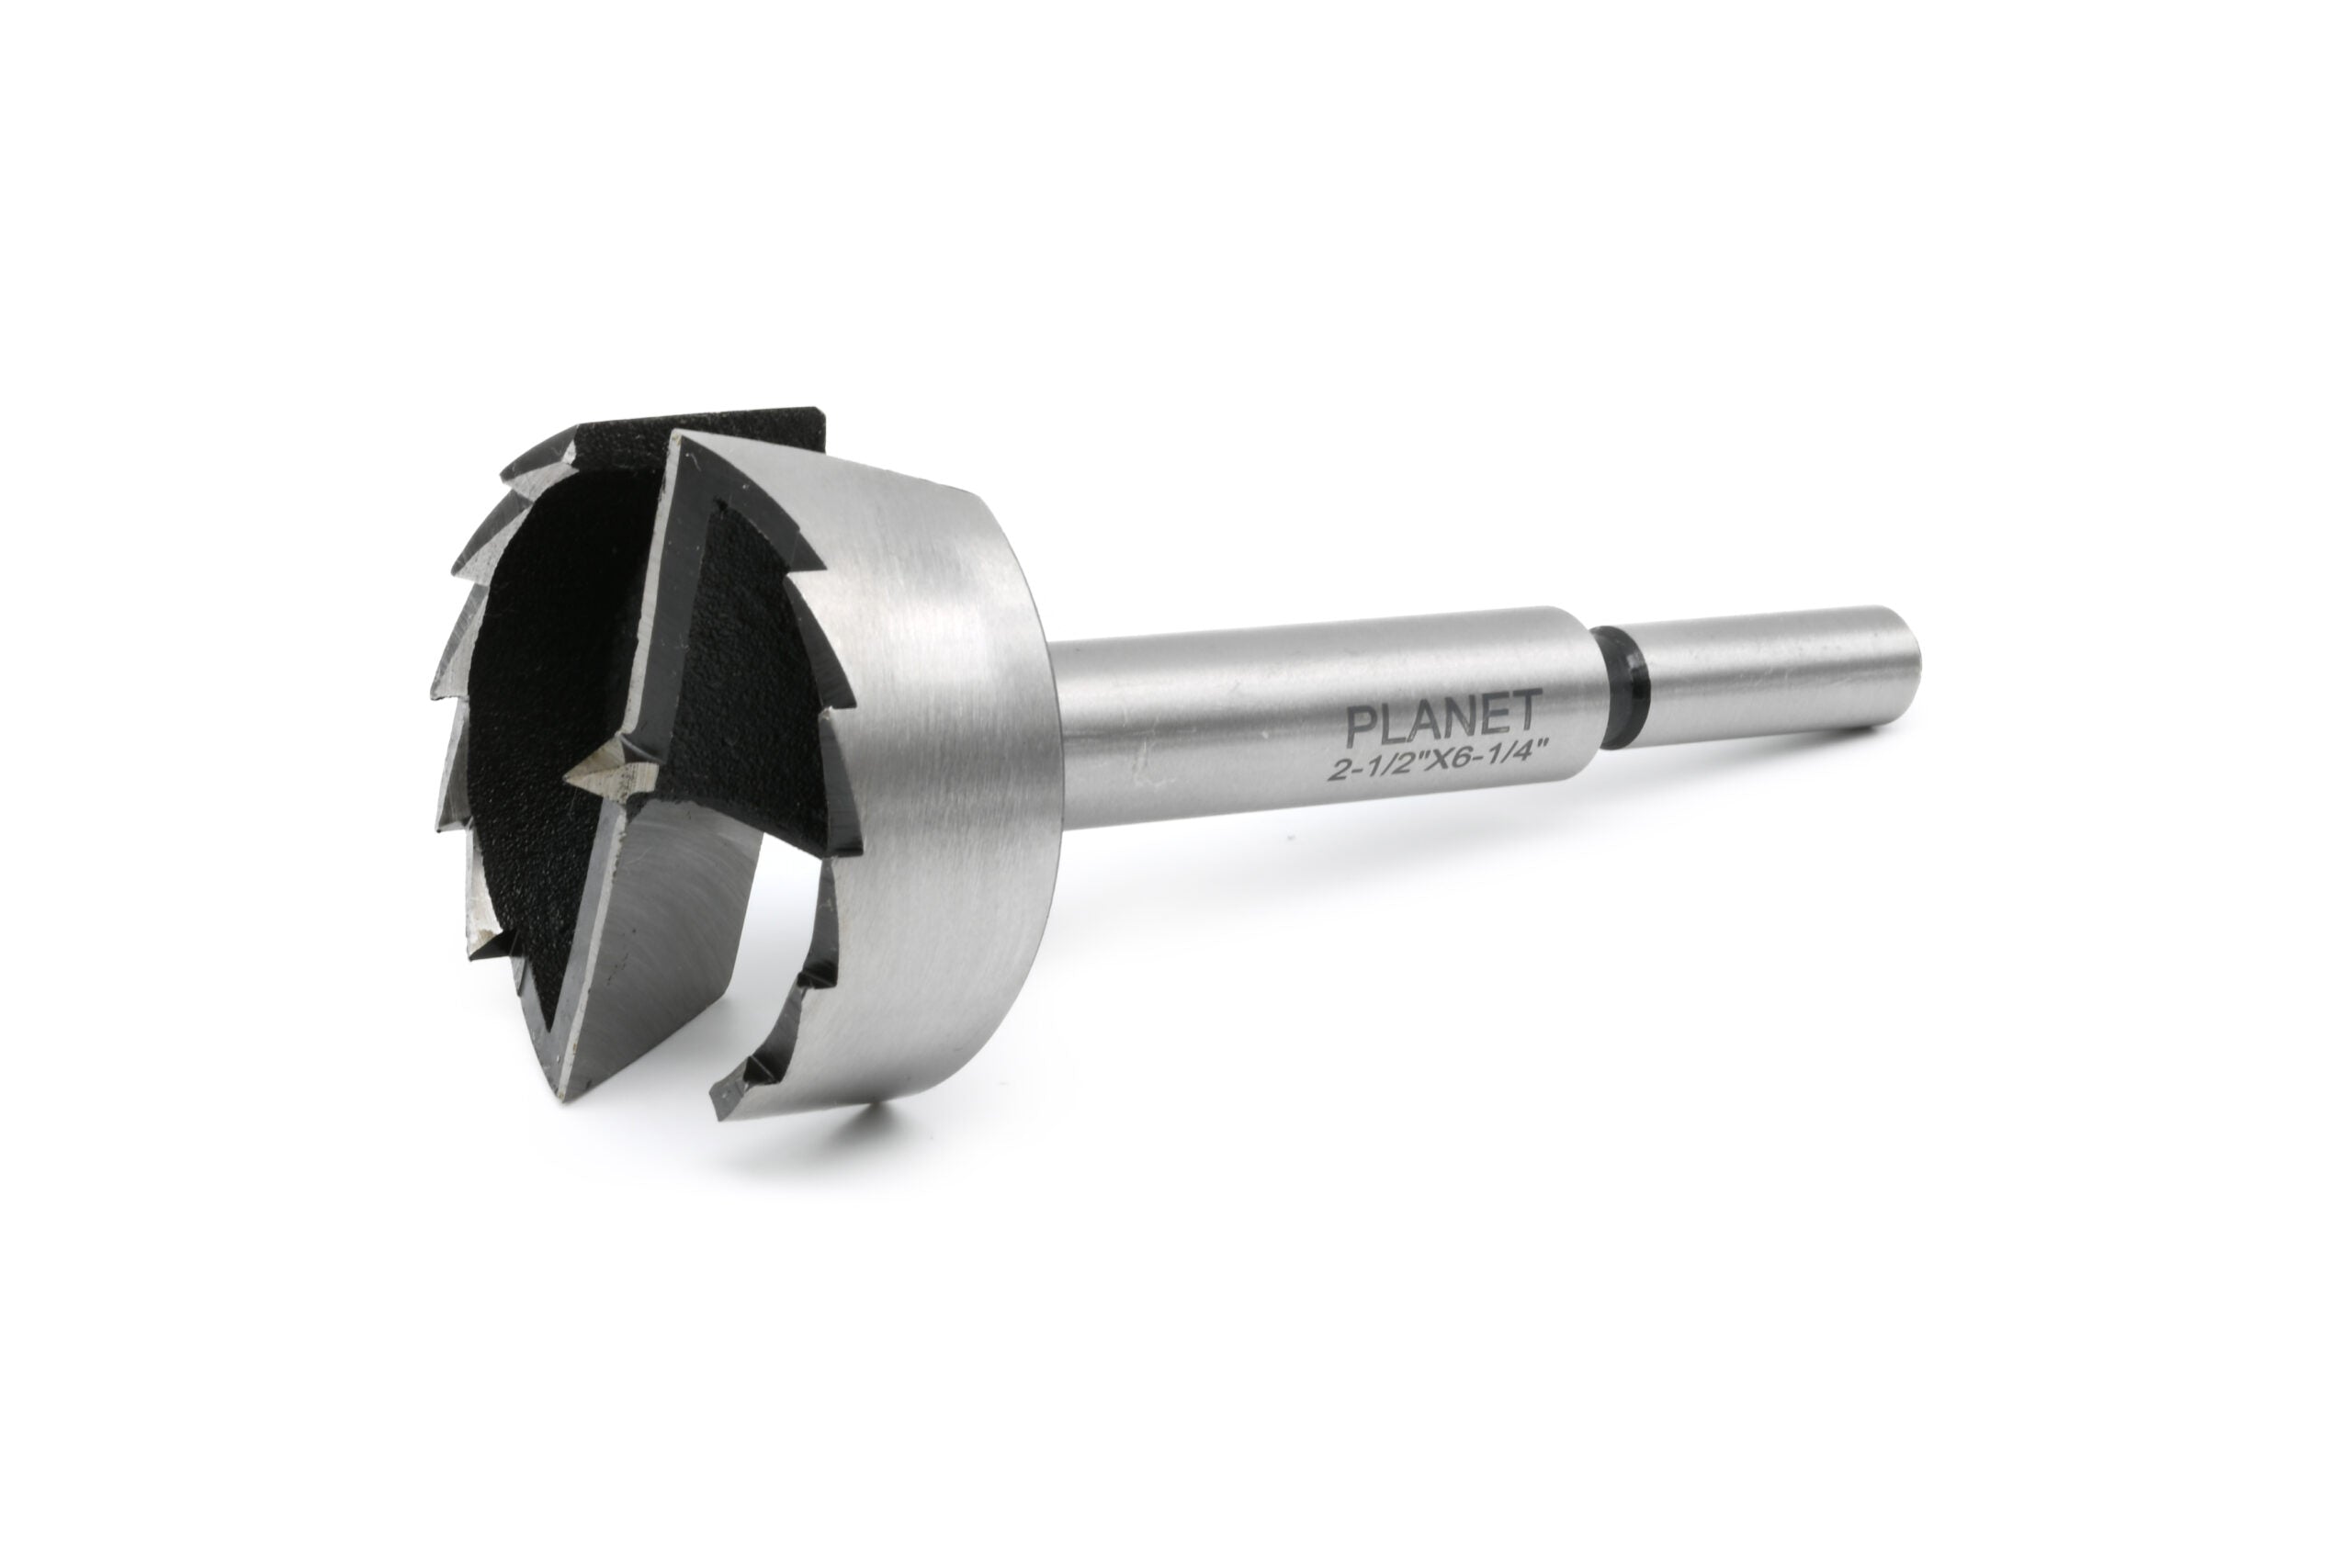 Planet Long Series Saw Tooth Forstner Bit 1-1/16" 26.99mm